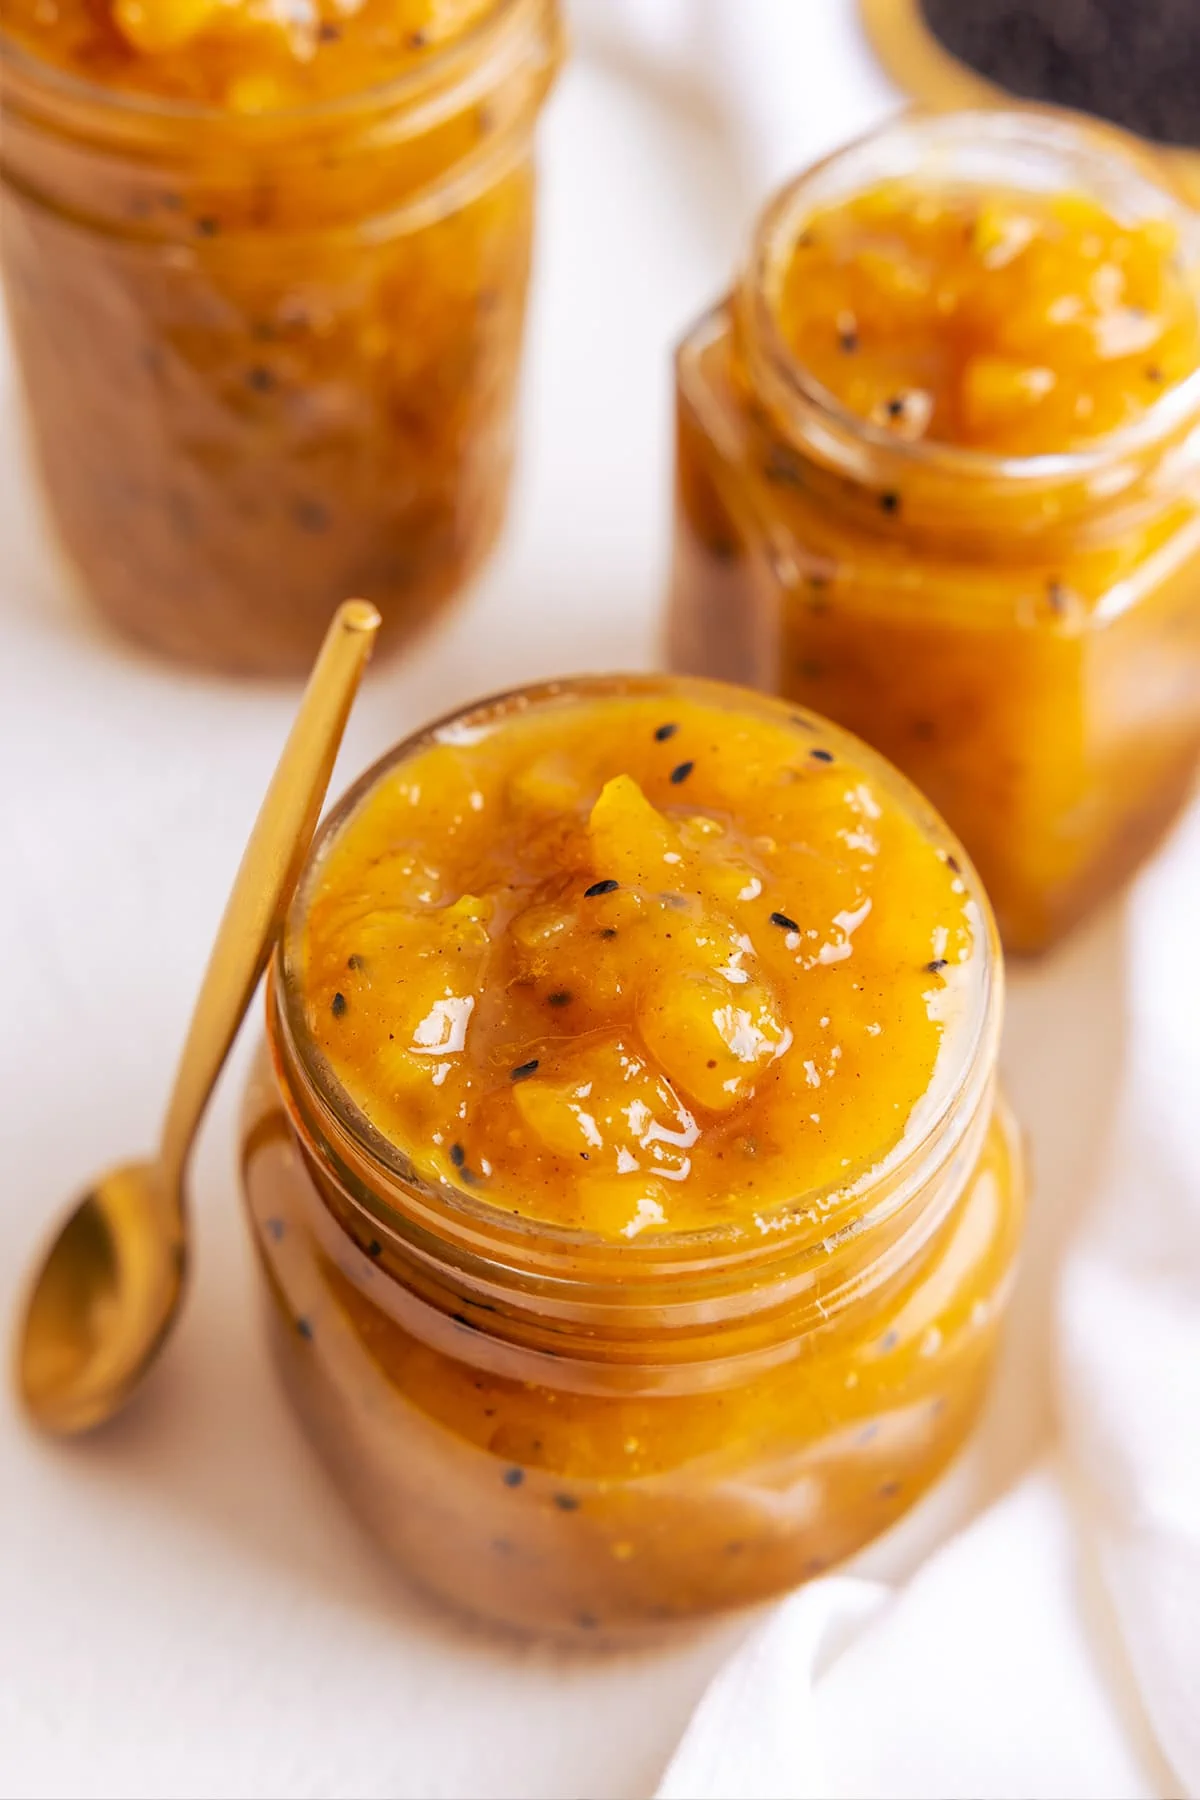 Close up picture of mango chutney in a glass jar with a brass spoon stood up next to the jar.